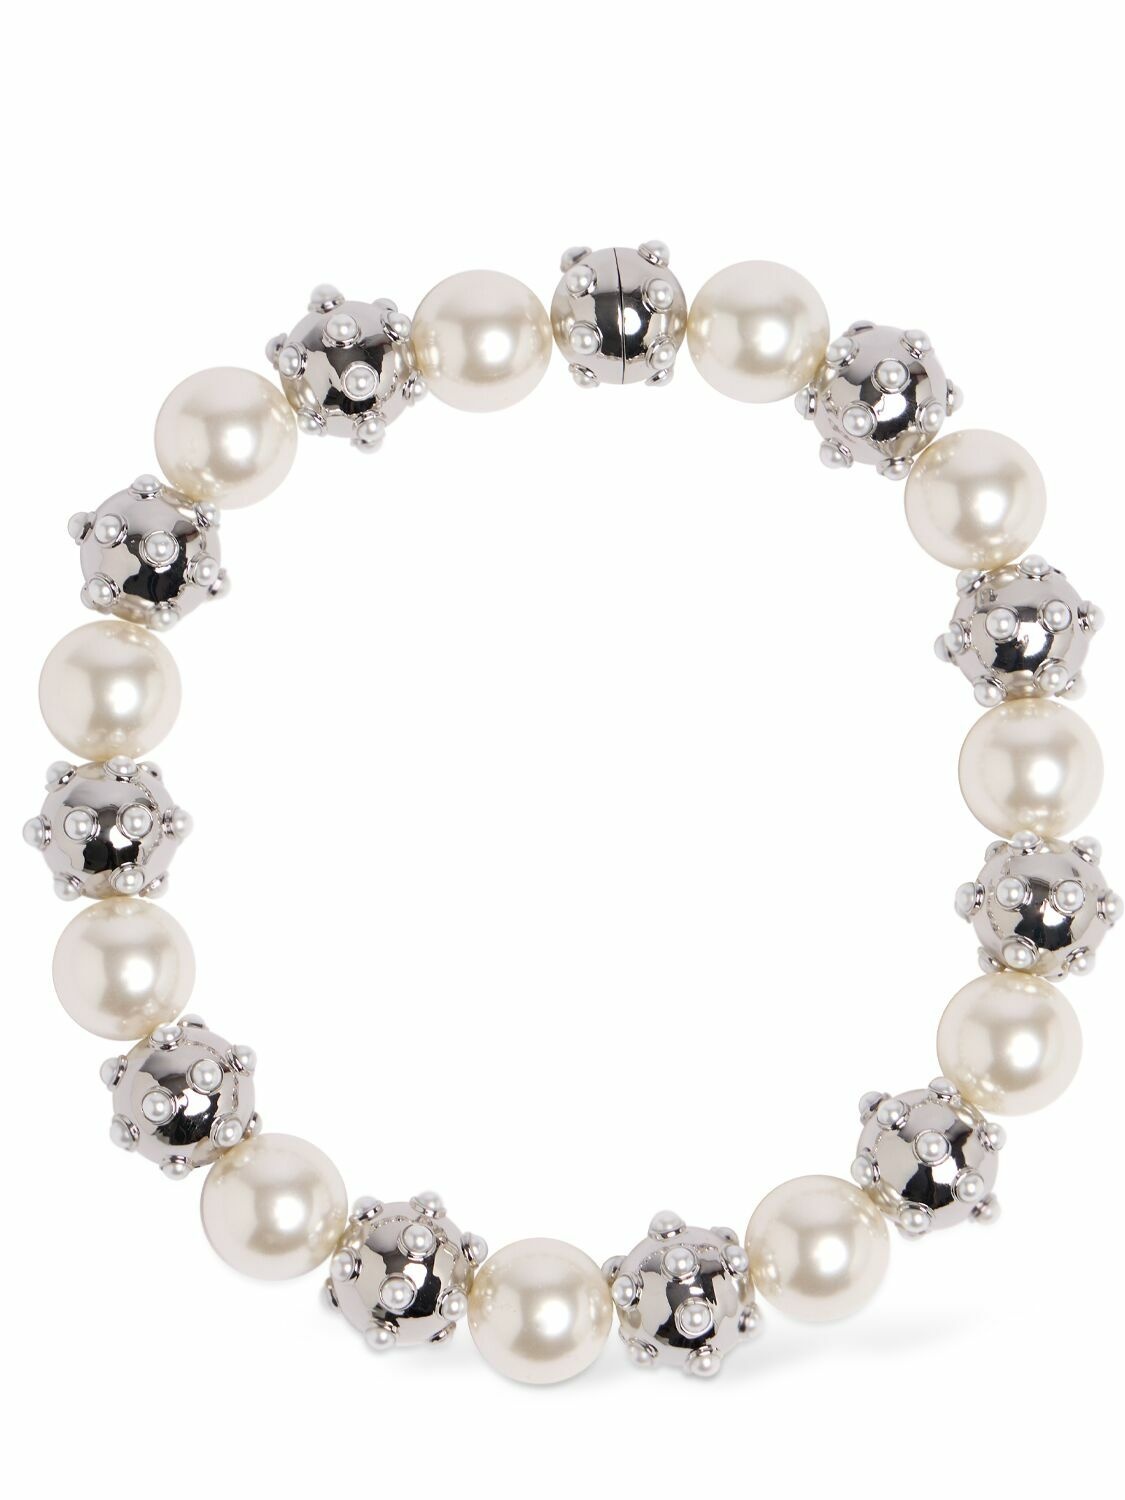 MARC JACOBS Dot Faux Pearl Collar Necklace